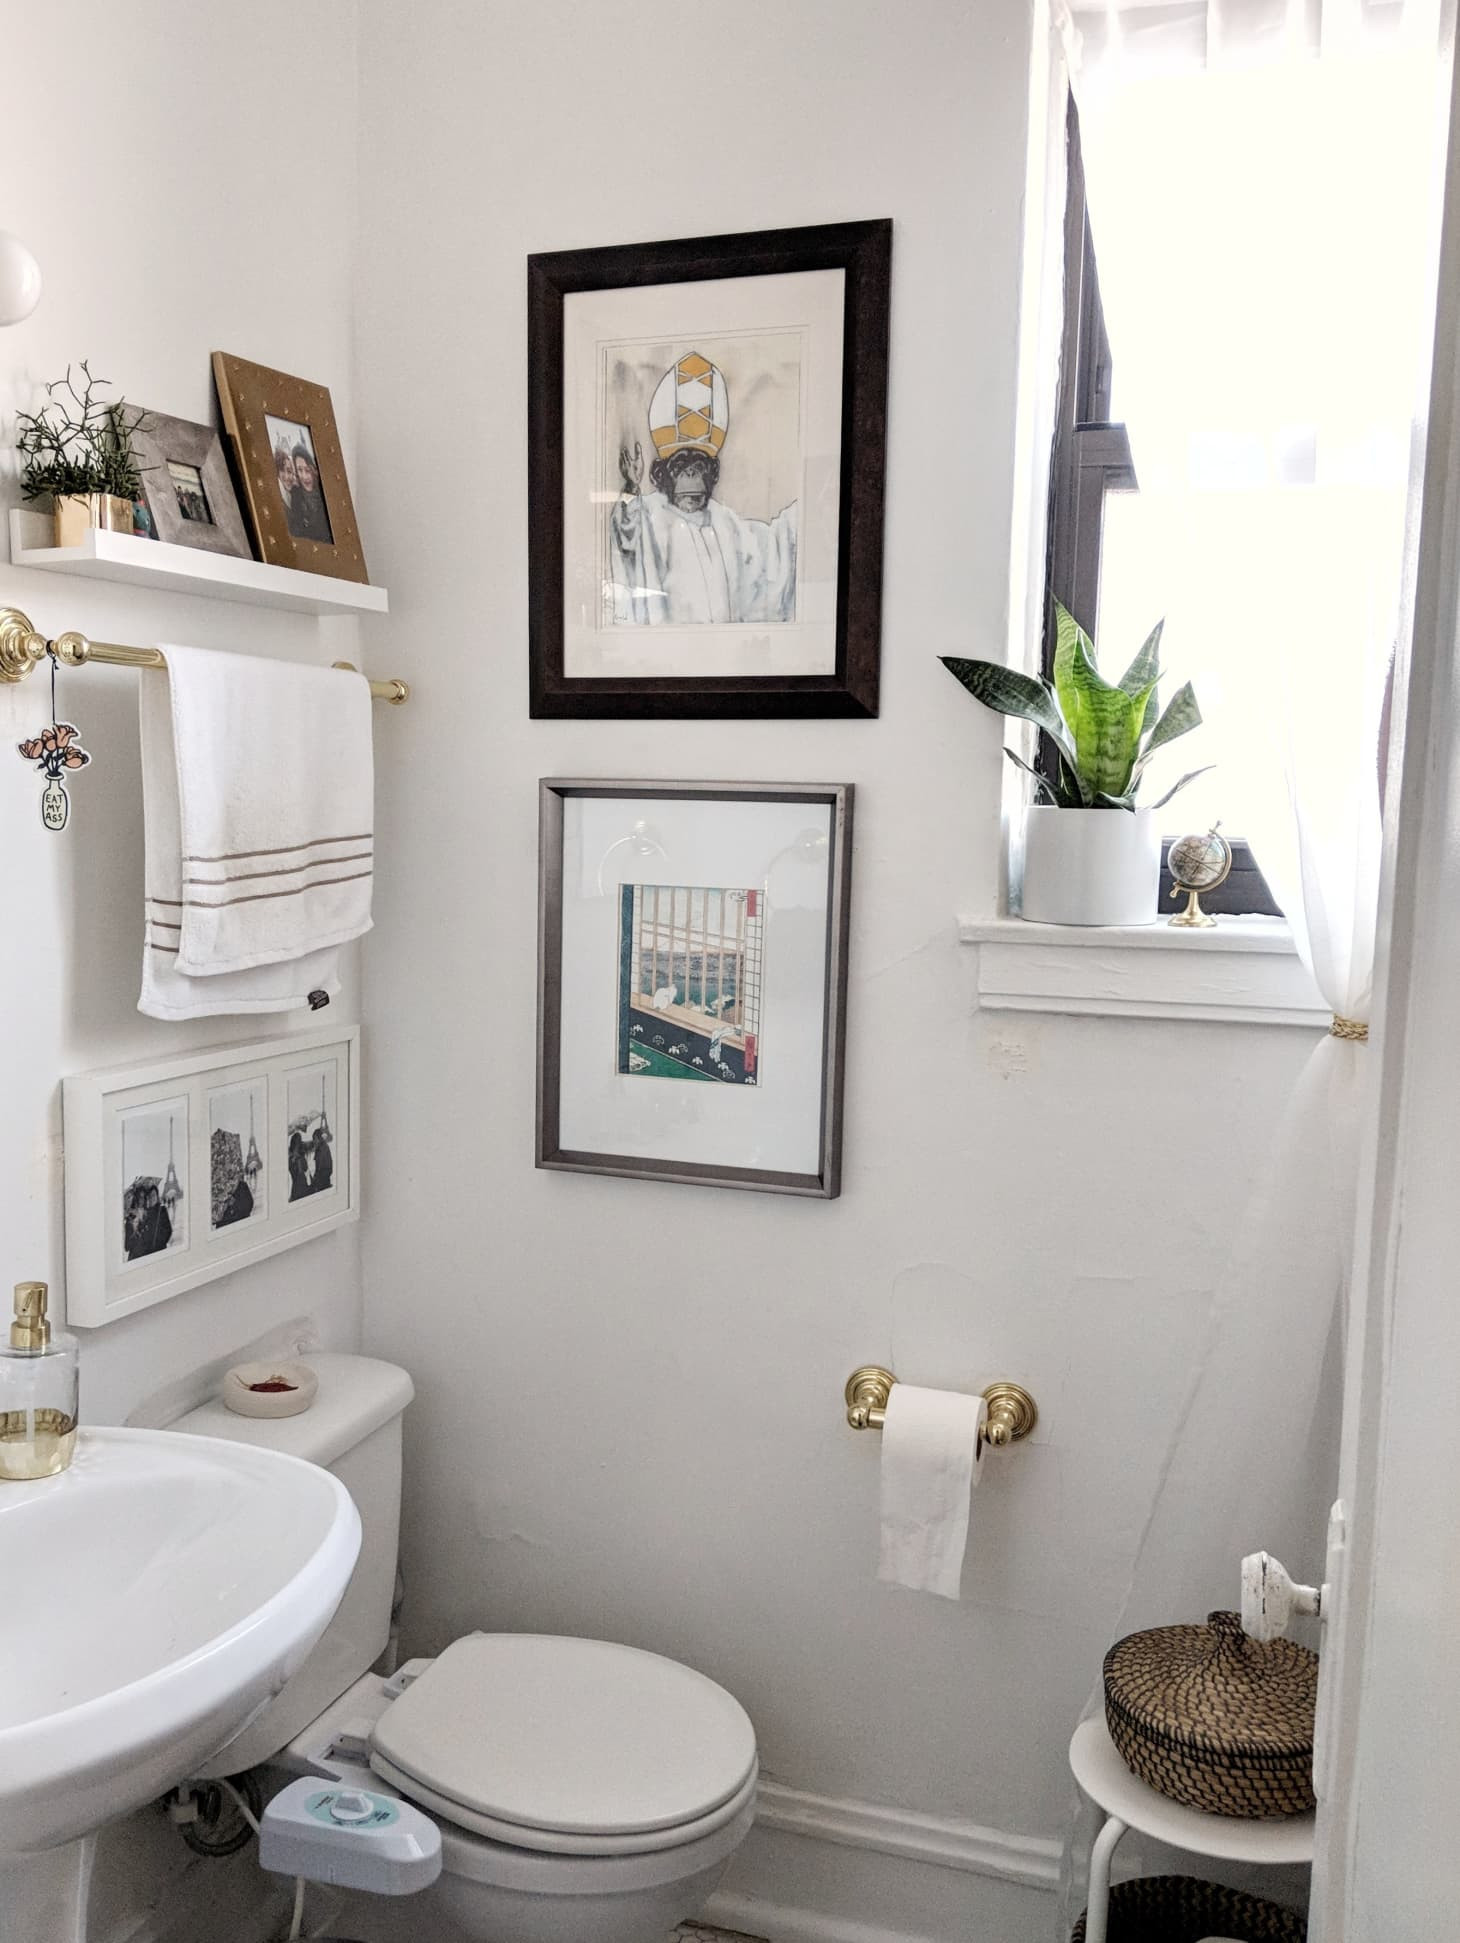 Apartment Bathroom Decorating Ideas
 10 Ideas Where To Put Towels In A Small Bathroom You Need